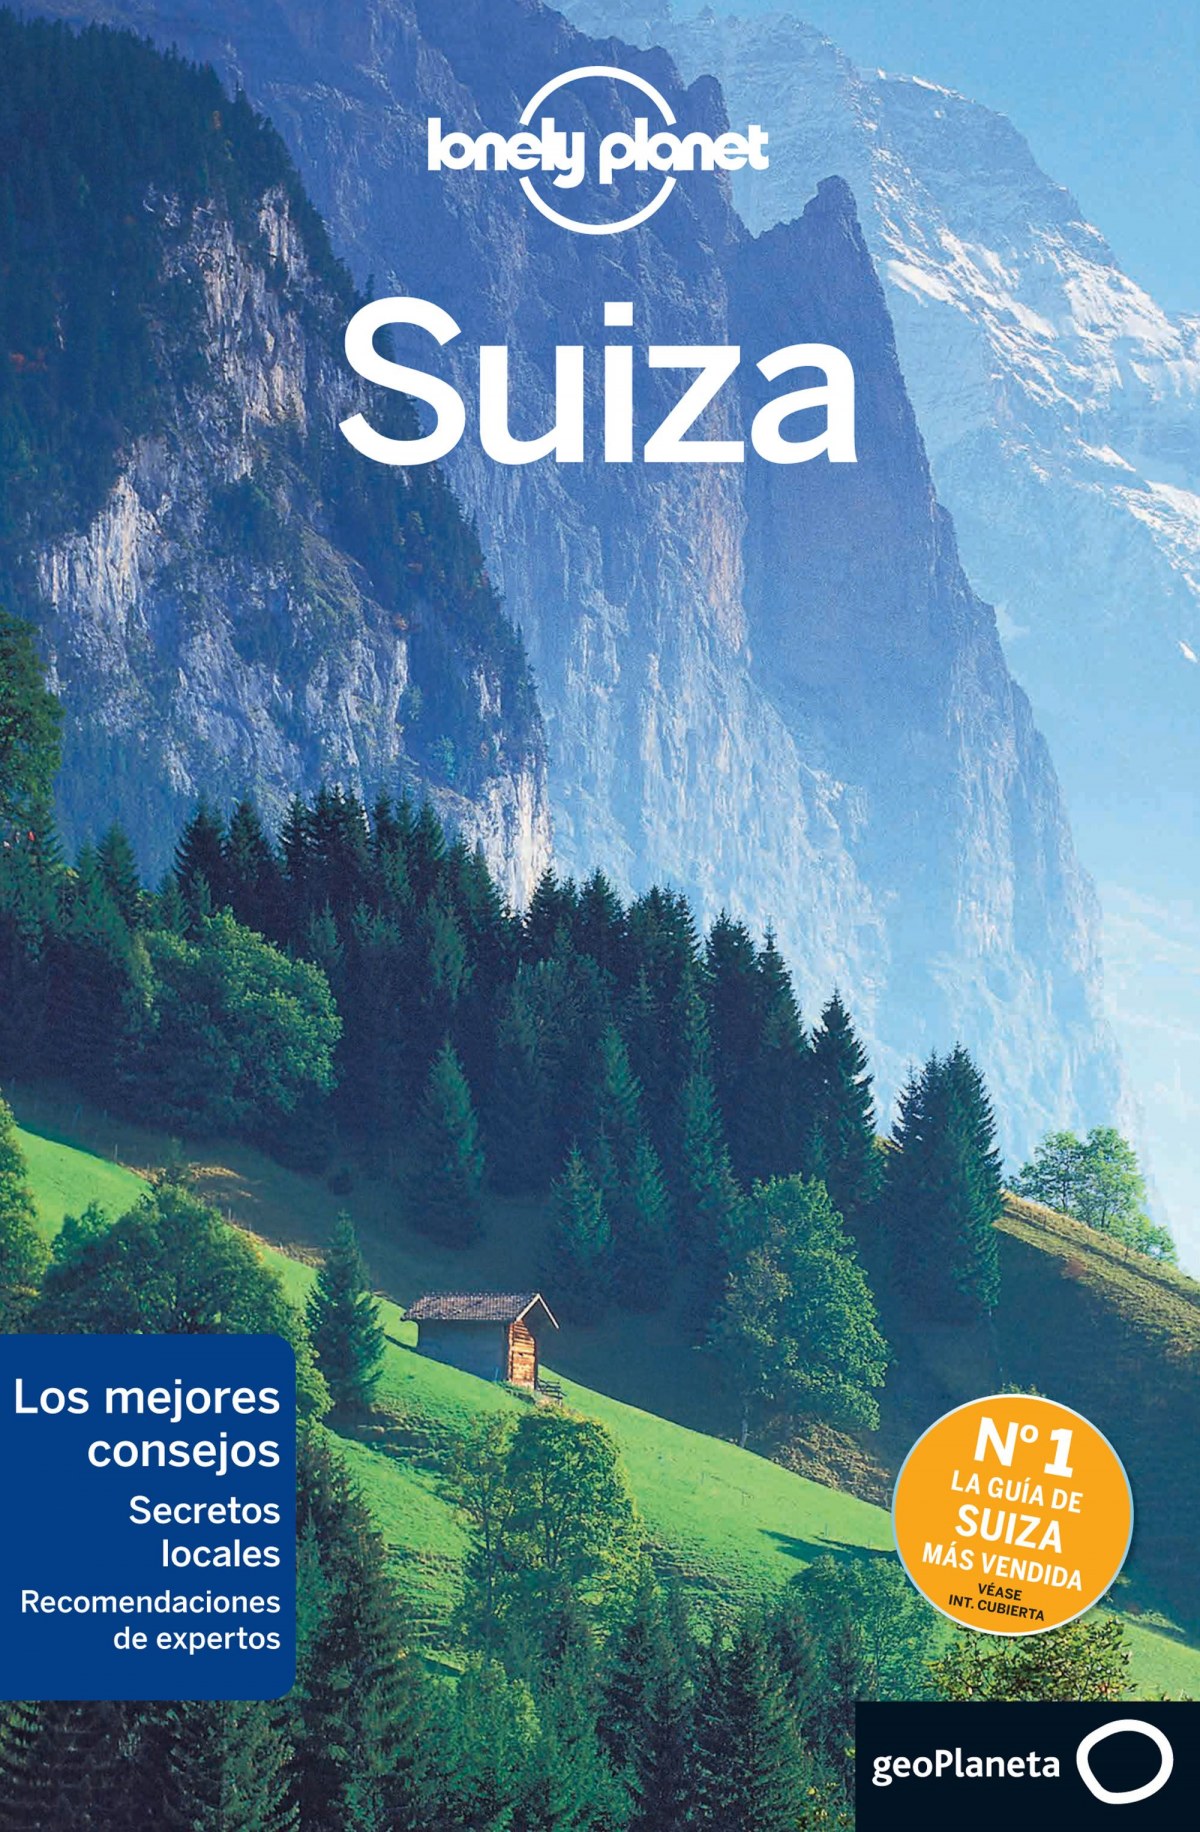 Suiza 2015 - Vv.Aa.